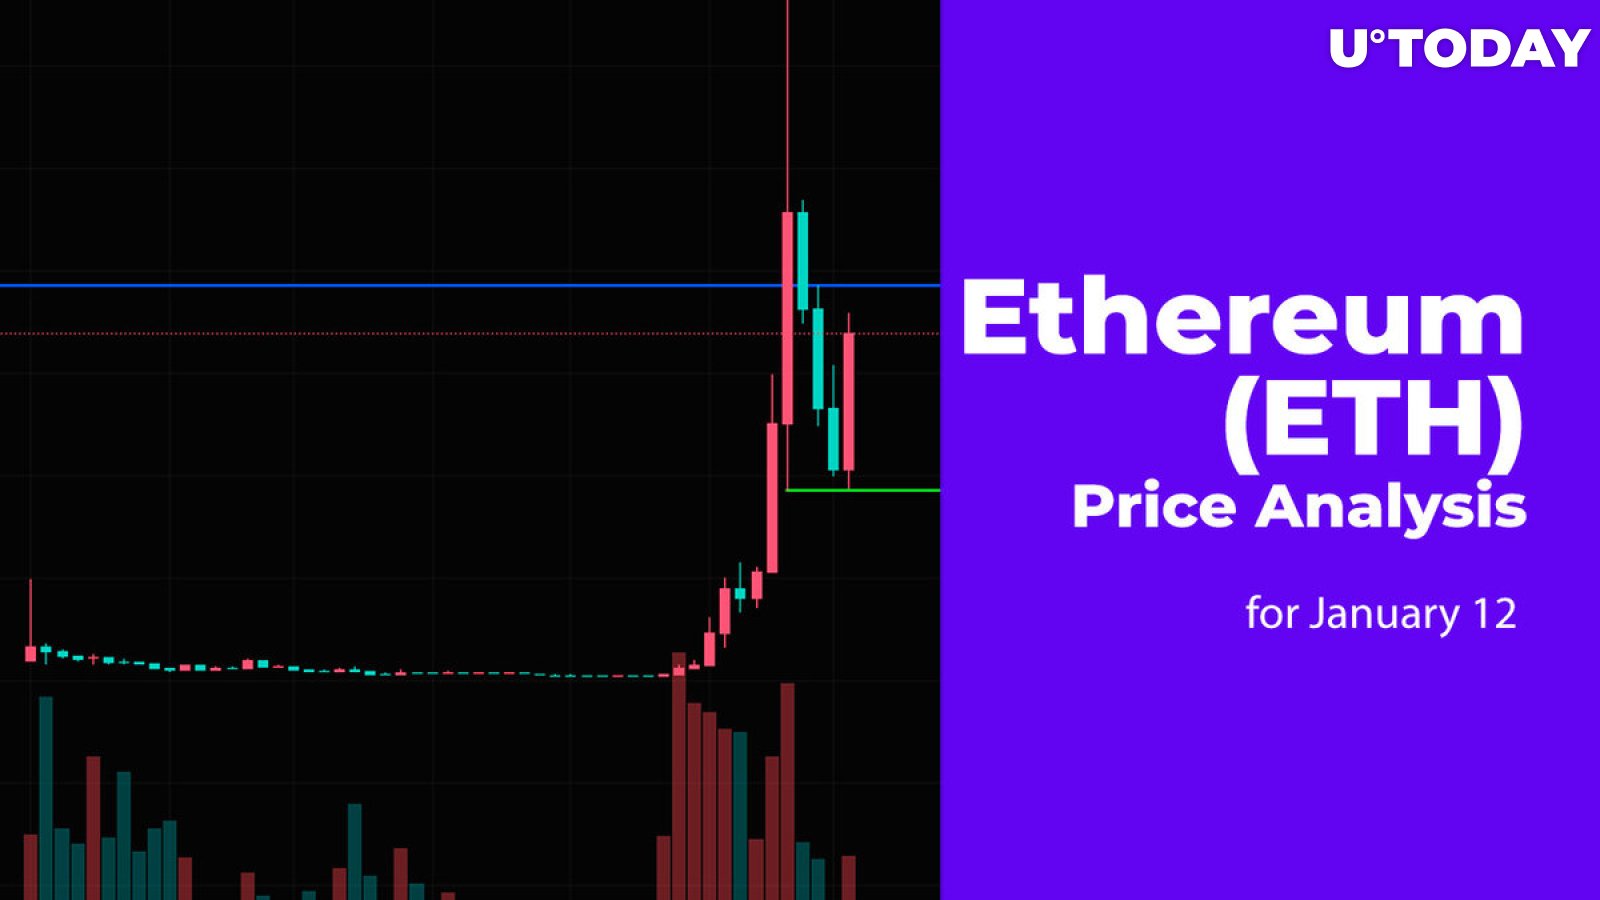 Ethereum (ETH) Price Analysis for January 12